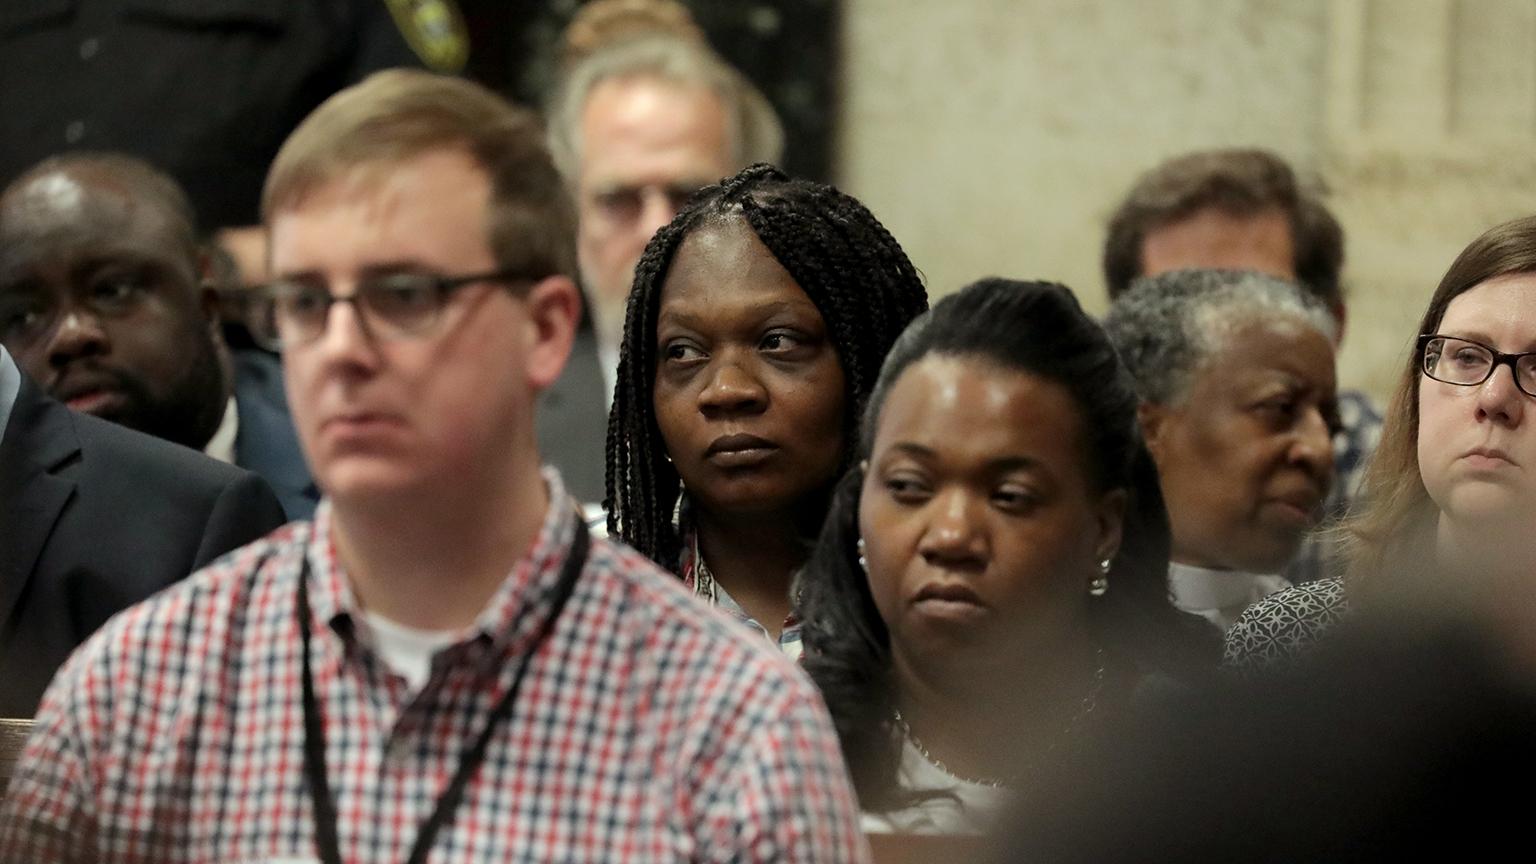 Tina Hunter, center, watches from the gallery during the trial for the shooting death of her son at the Leighton Criminal Court Building on Thursday, Sept. 20, 2018. (Antonio Perez / Chicago Tribune / Pool)